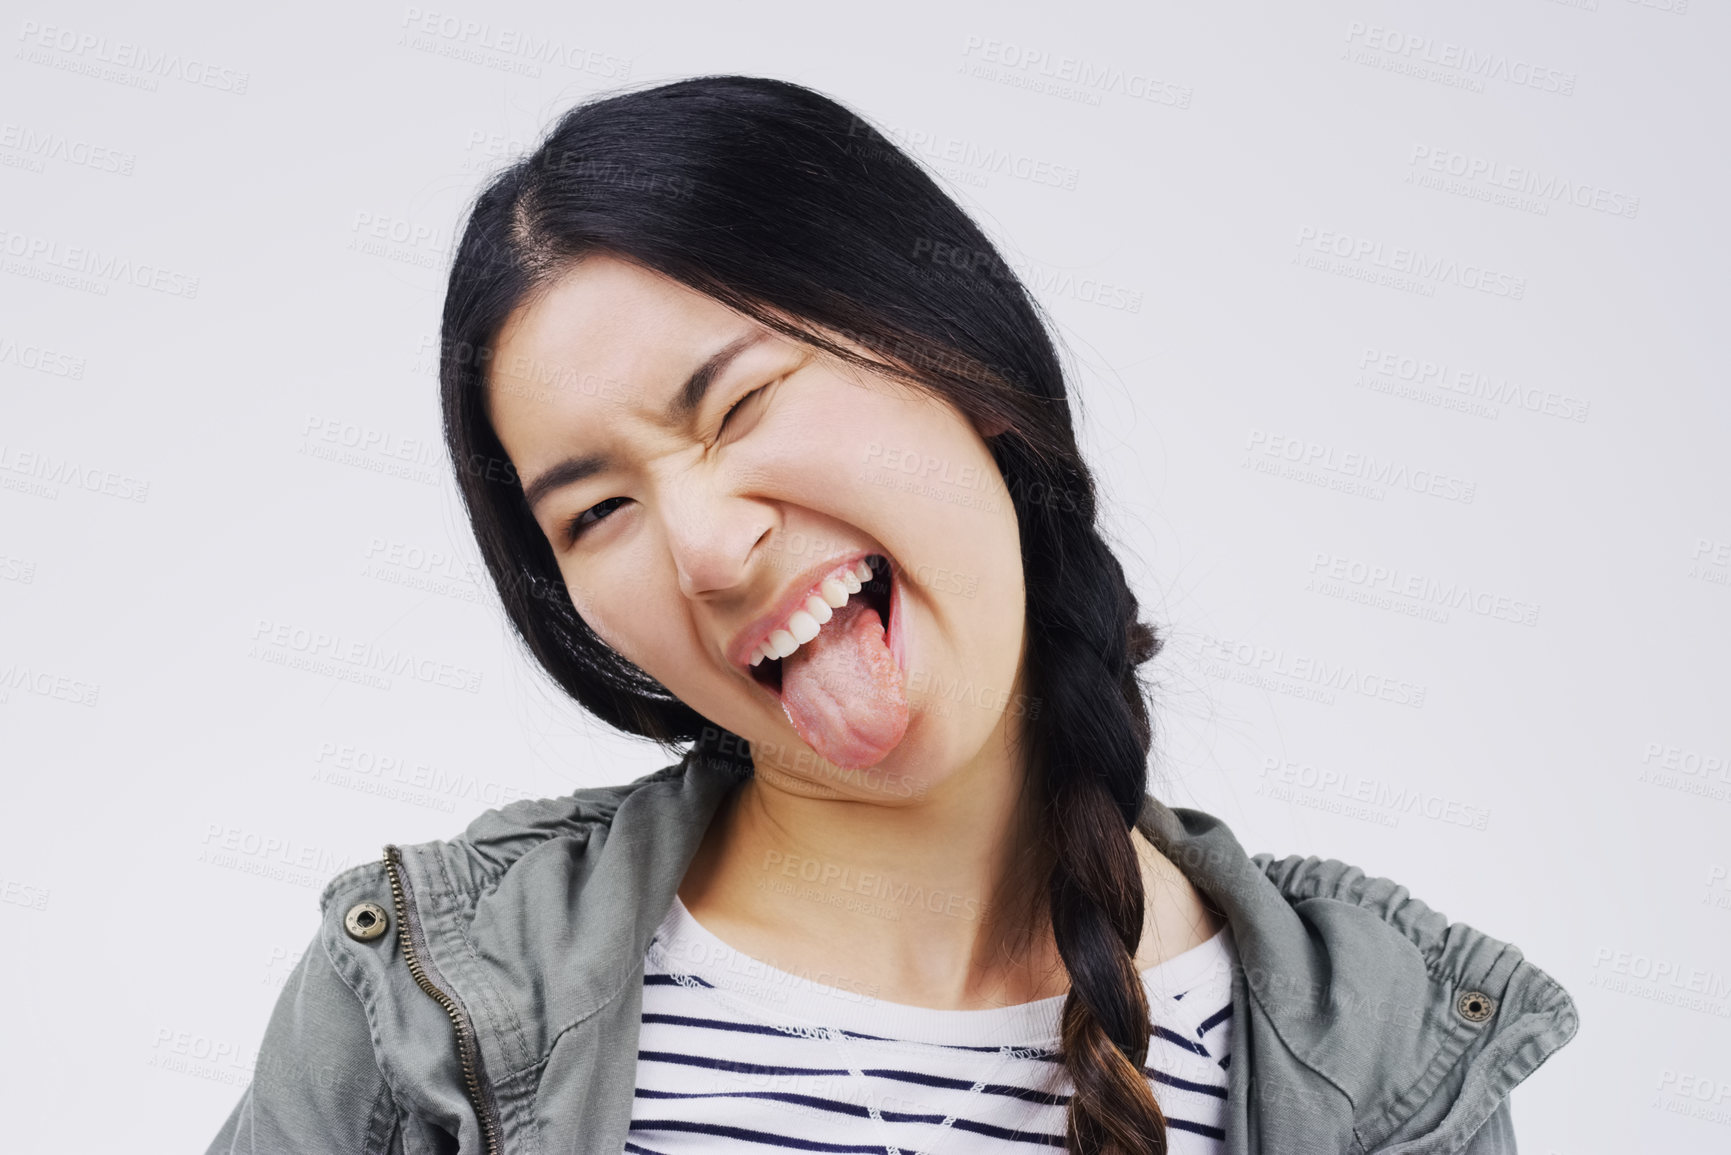 Buy stock photo Portrait, funny face and tongue with an asian woman in studio on a white background looking silly or goofy. Comedy, comic and wink with a crazy young female person joking indoor for fun or humor